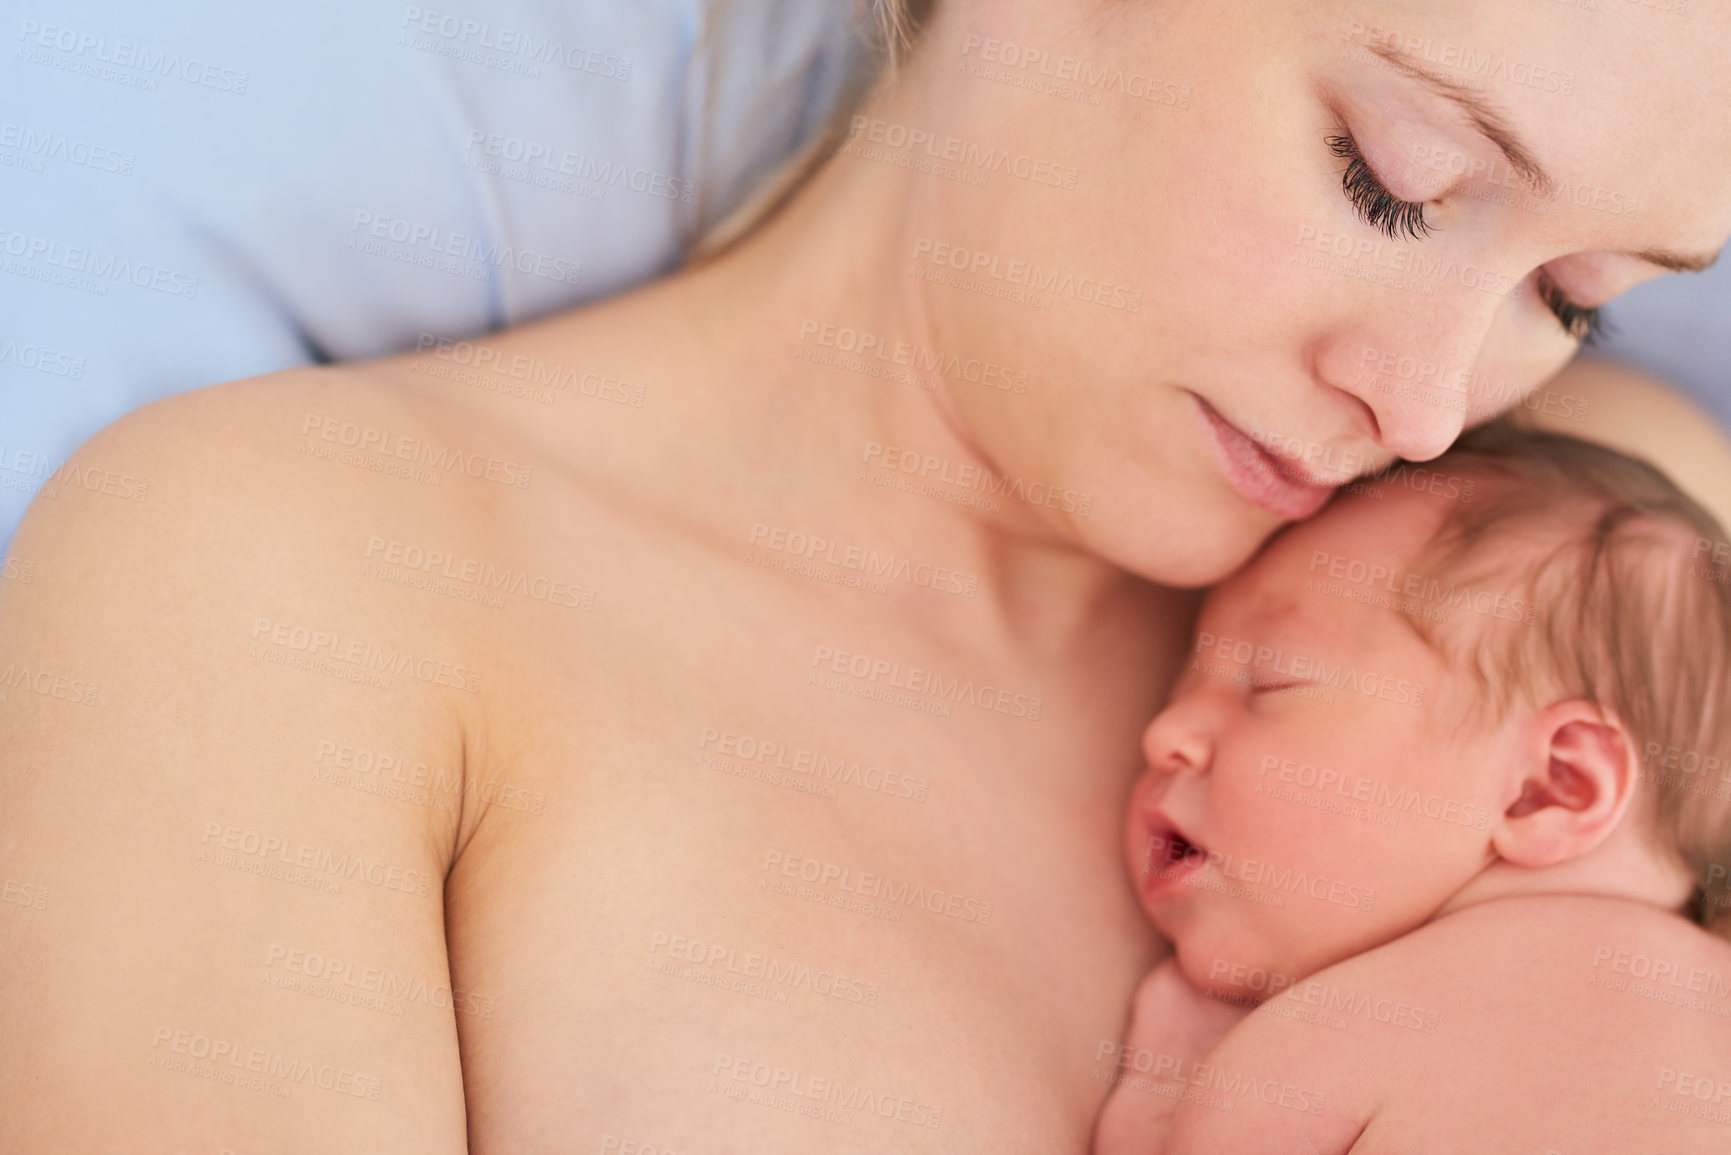 Buy stock photo Shot of a beautiful young mother and her newly born baby girl sleeping in a hospital bed together